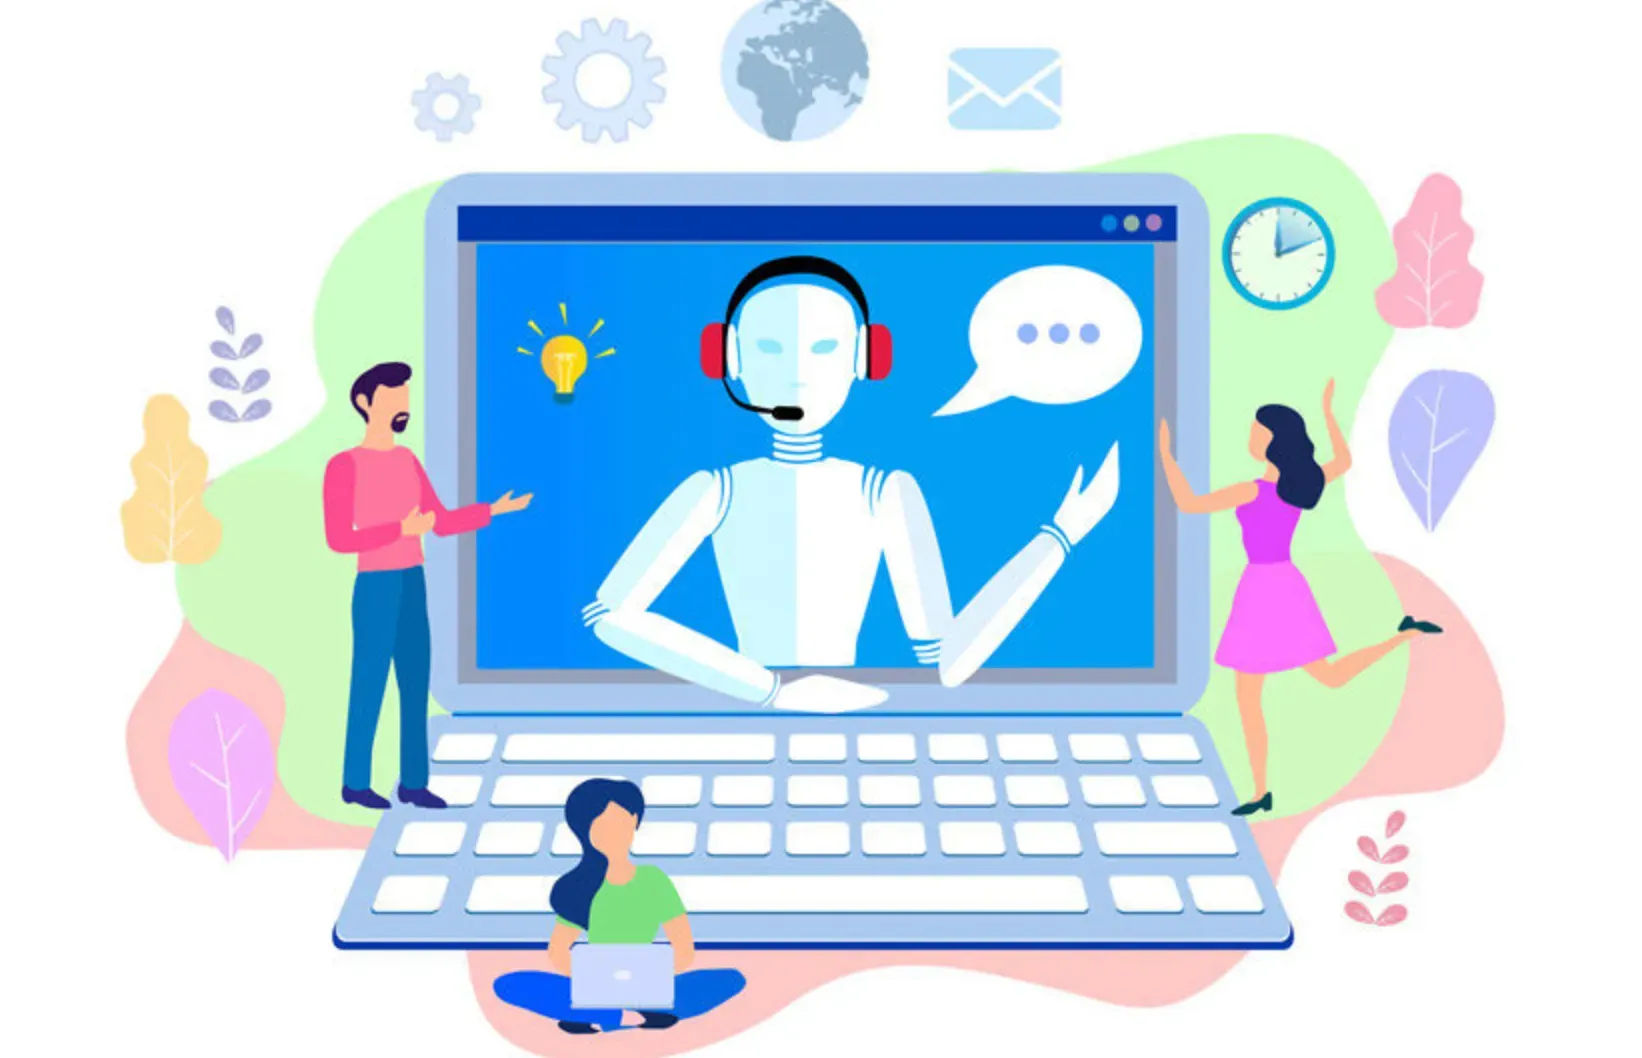 Where Can AI in Customer Service be Used?